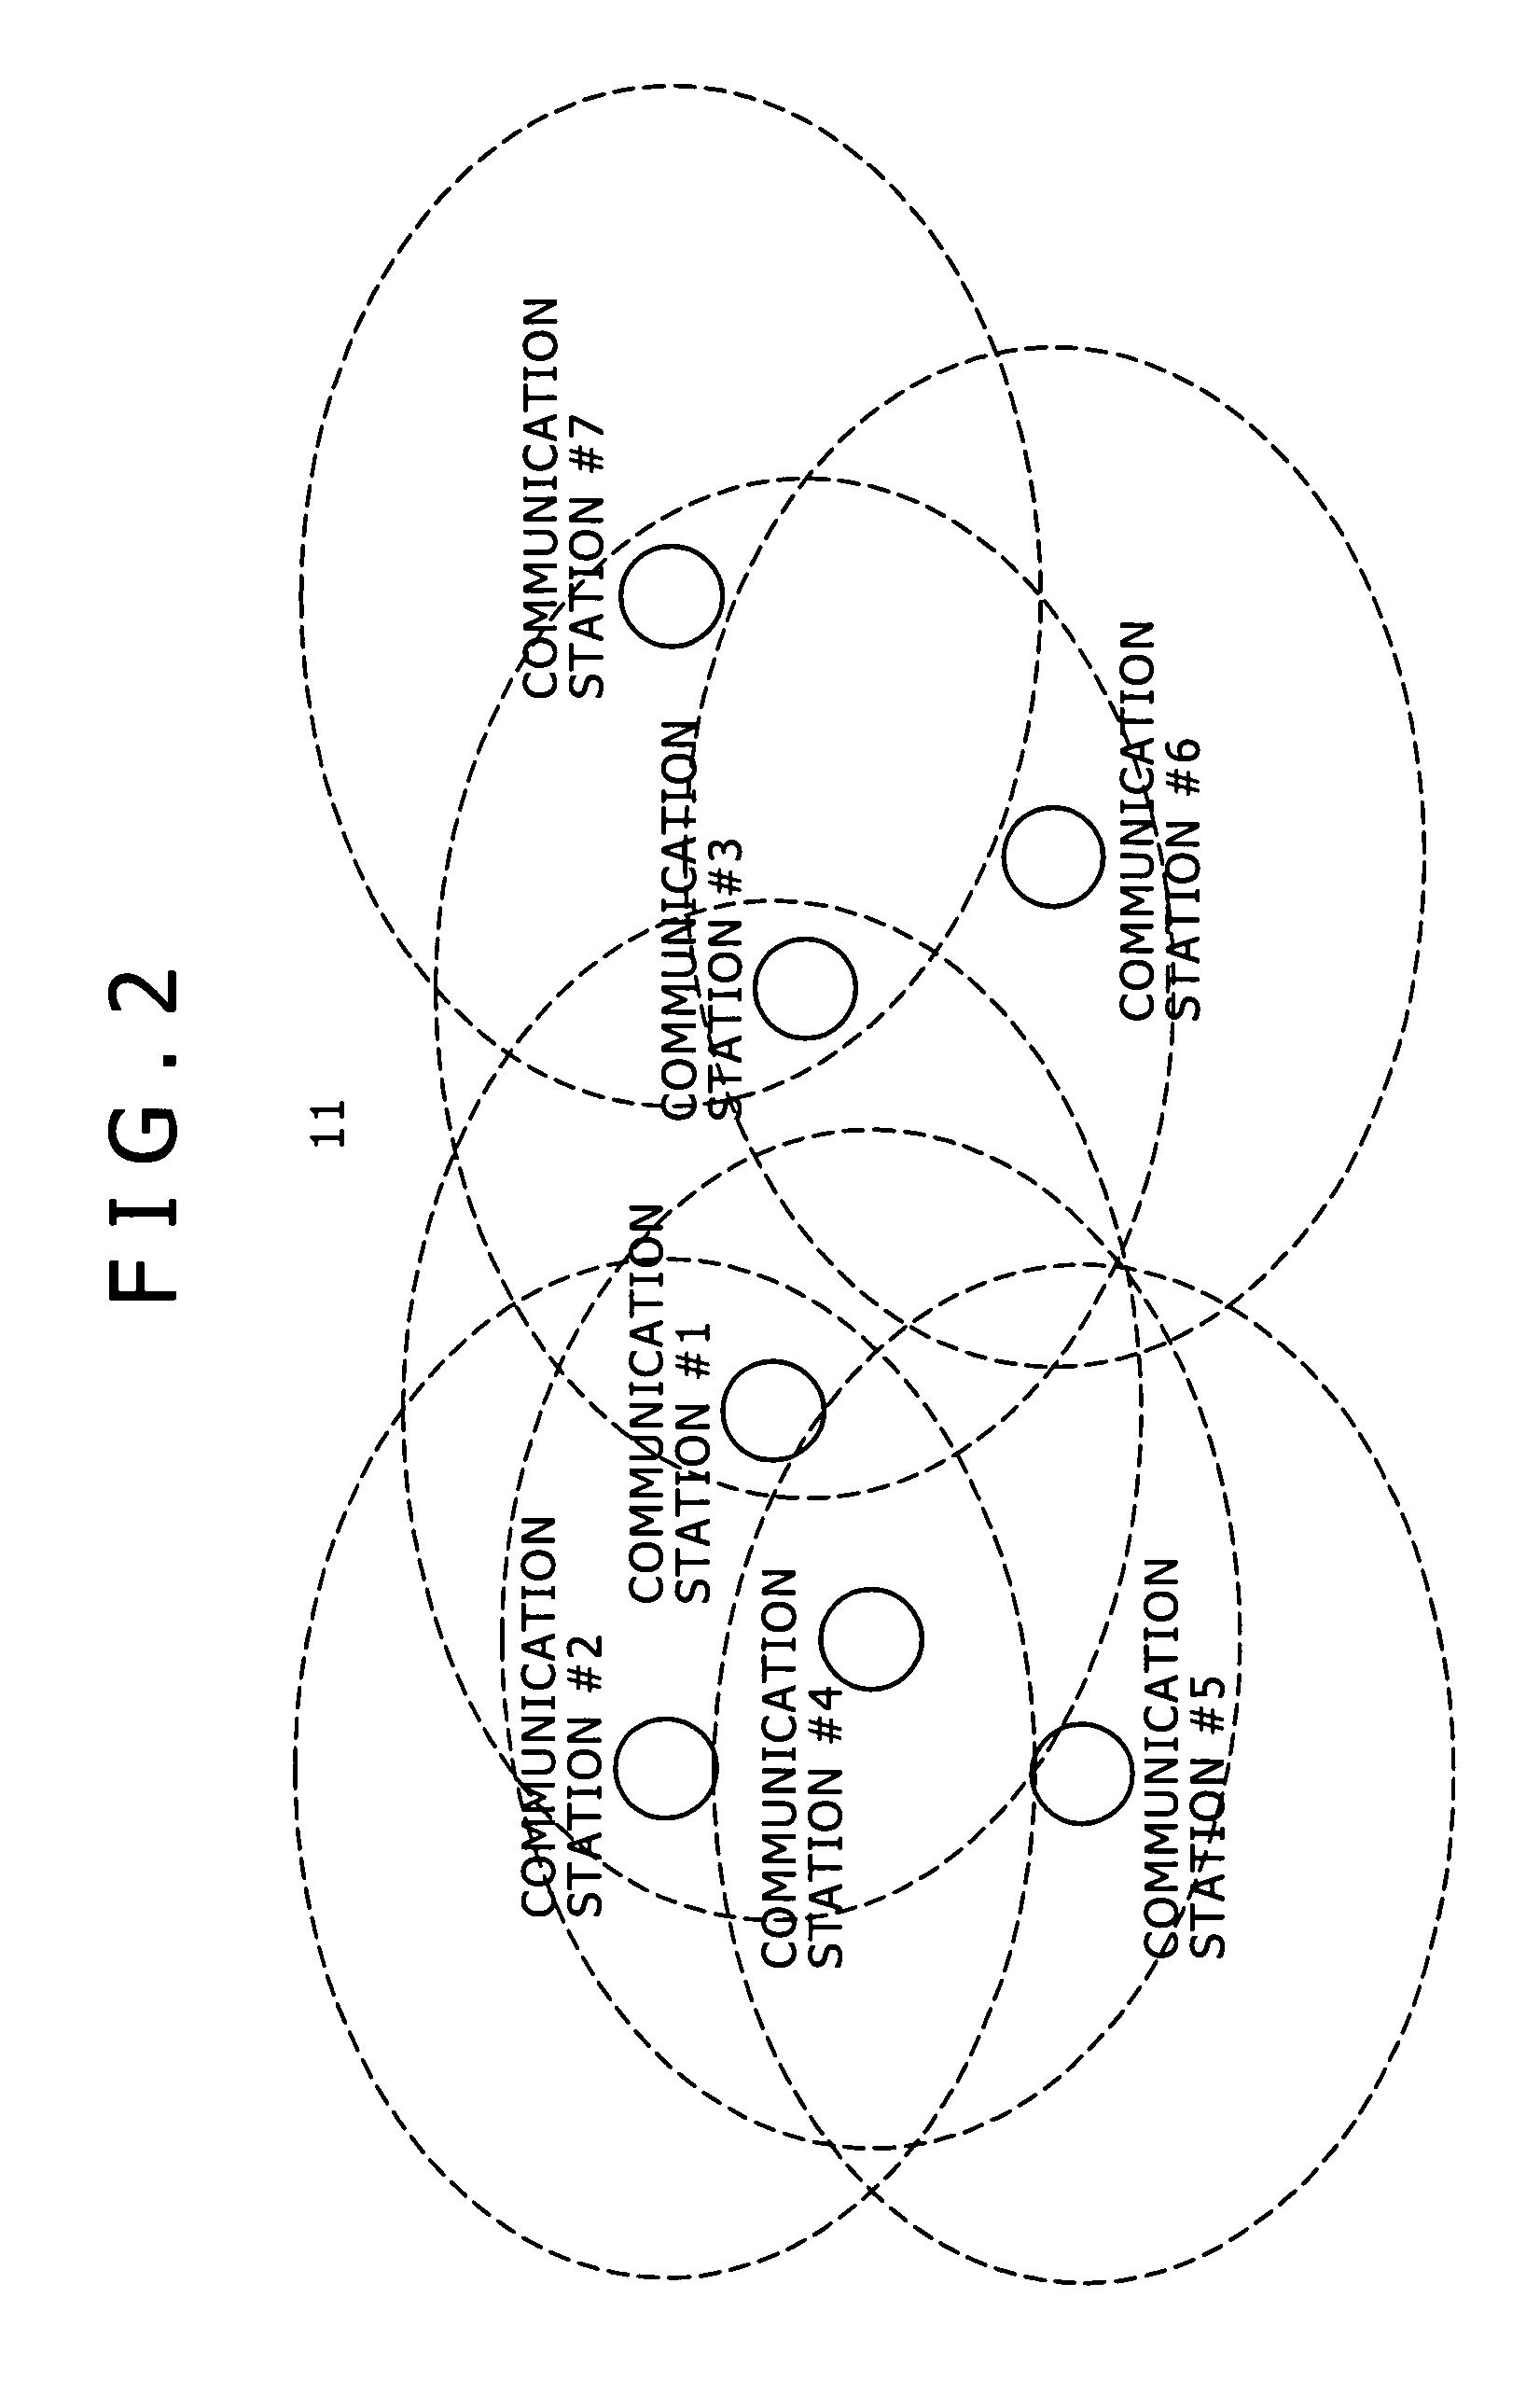 Wireless communication apparatus for synchronizing a frame cycle's beginning position in relation to other devices